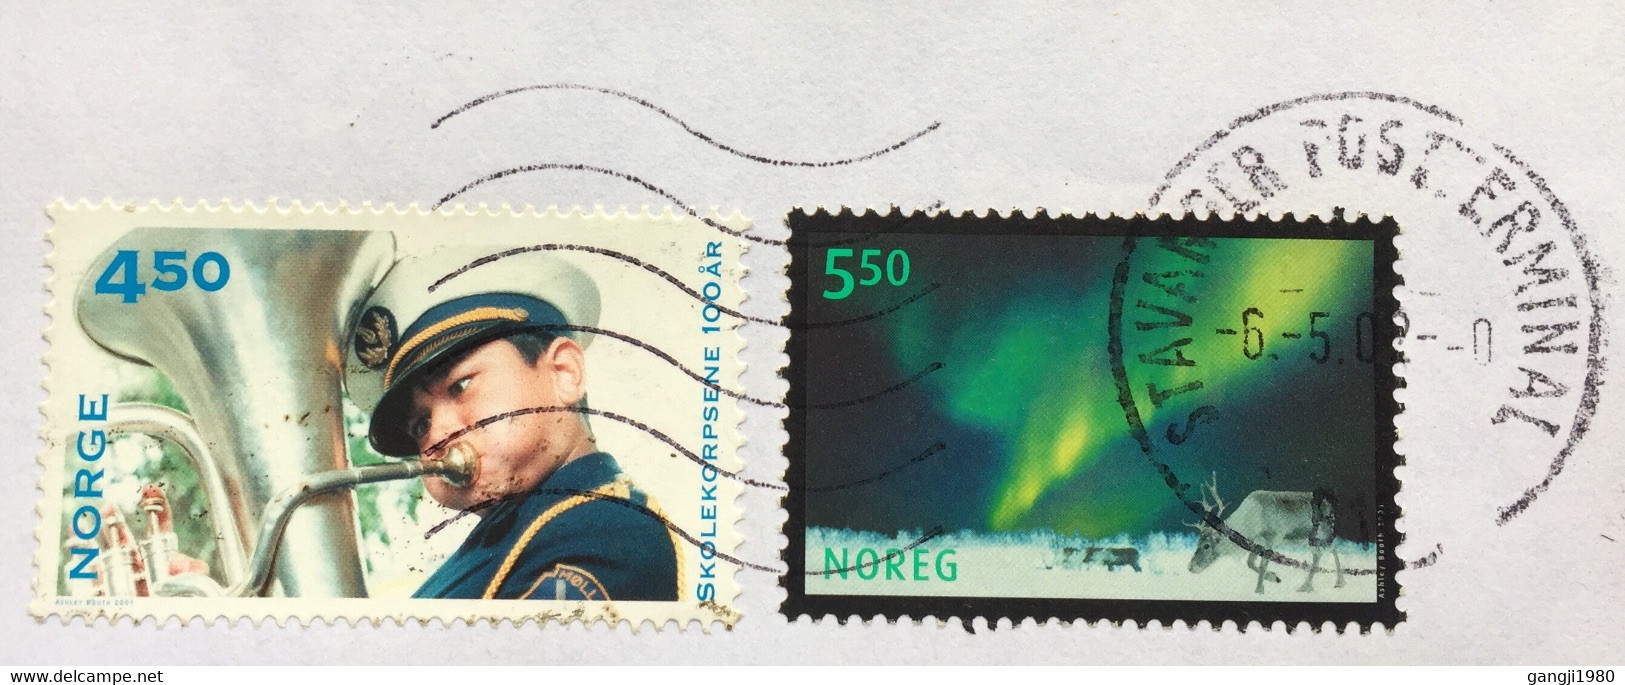 NORWAY 2002, USED AIRMAIL COVER TO INDIA,2 STAMPS ,MUSIC,ANIMAL,NATURE STAVANGER CANCELLATION - Briefe U. Dokumente